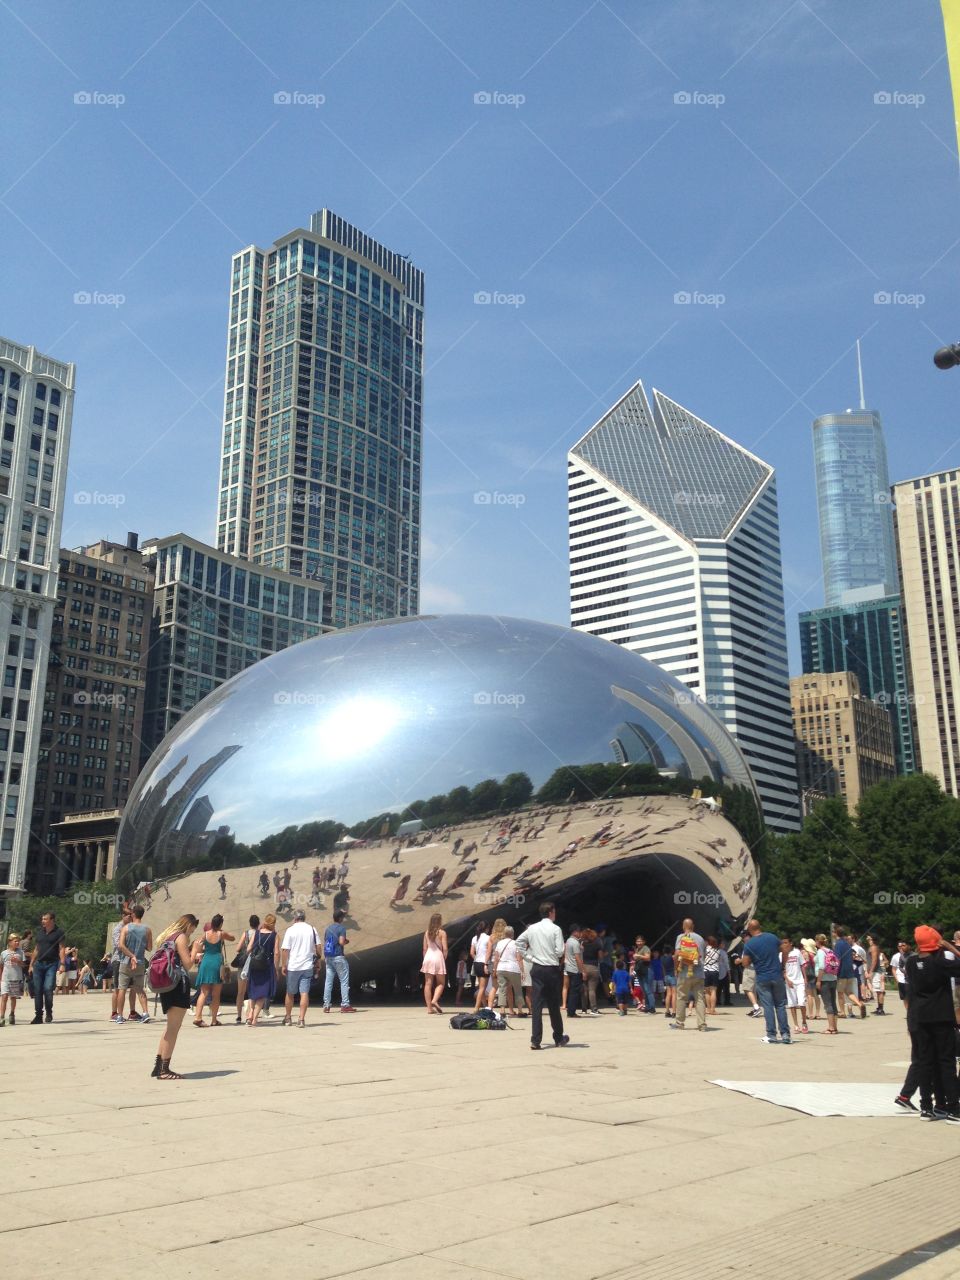 "Cloud Gate" in Chicago. Skyline included. We locals lovingly refer to it as "The Bean." 